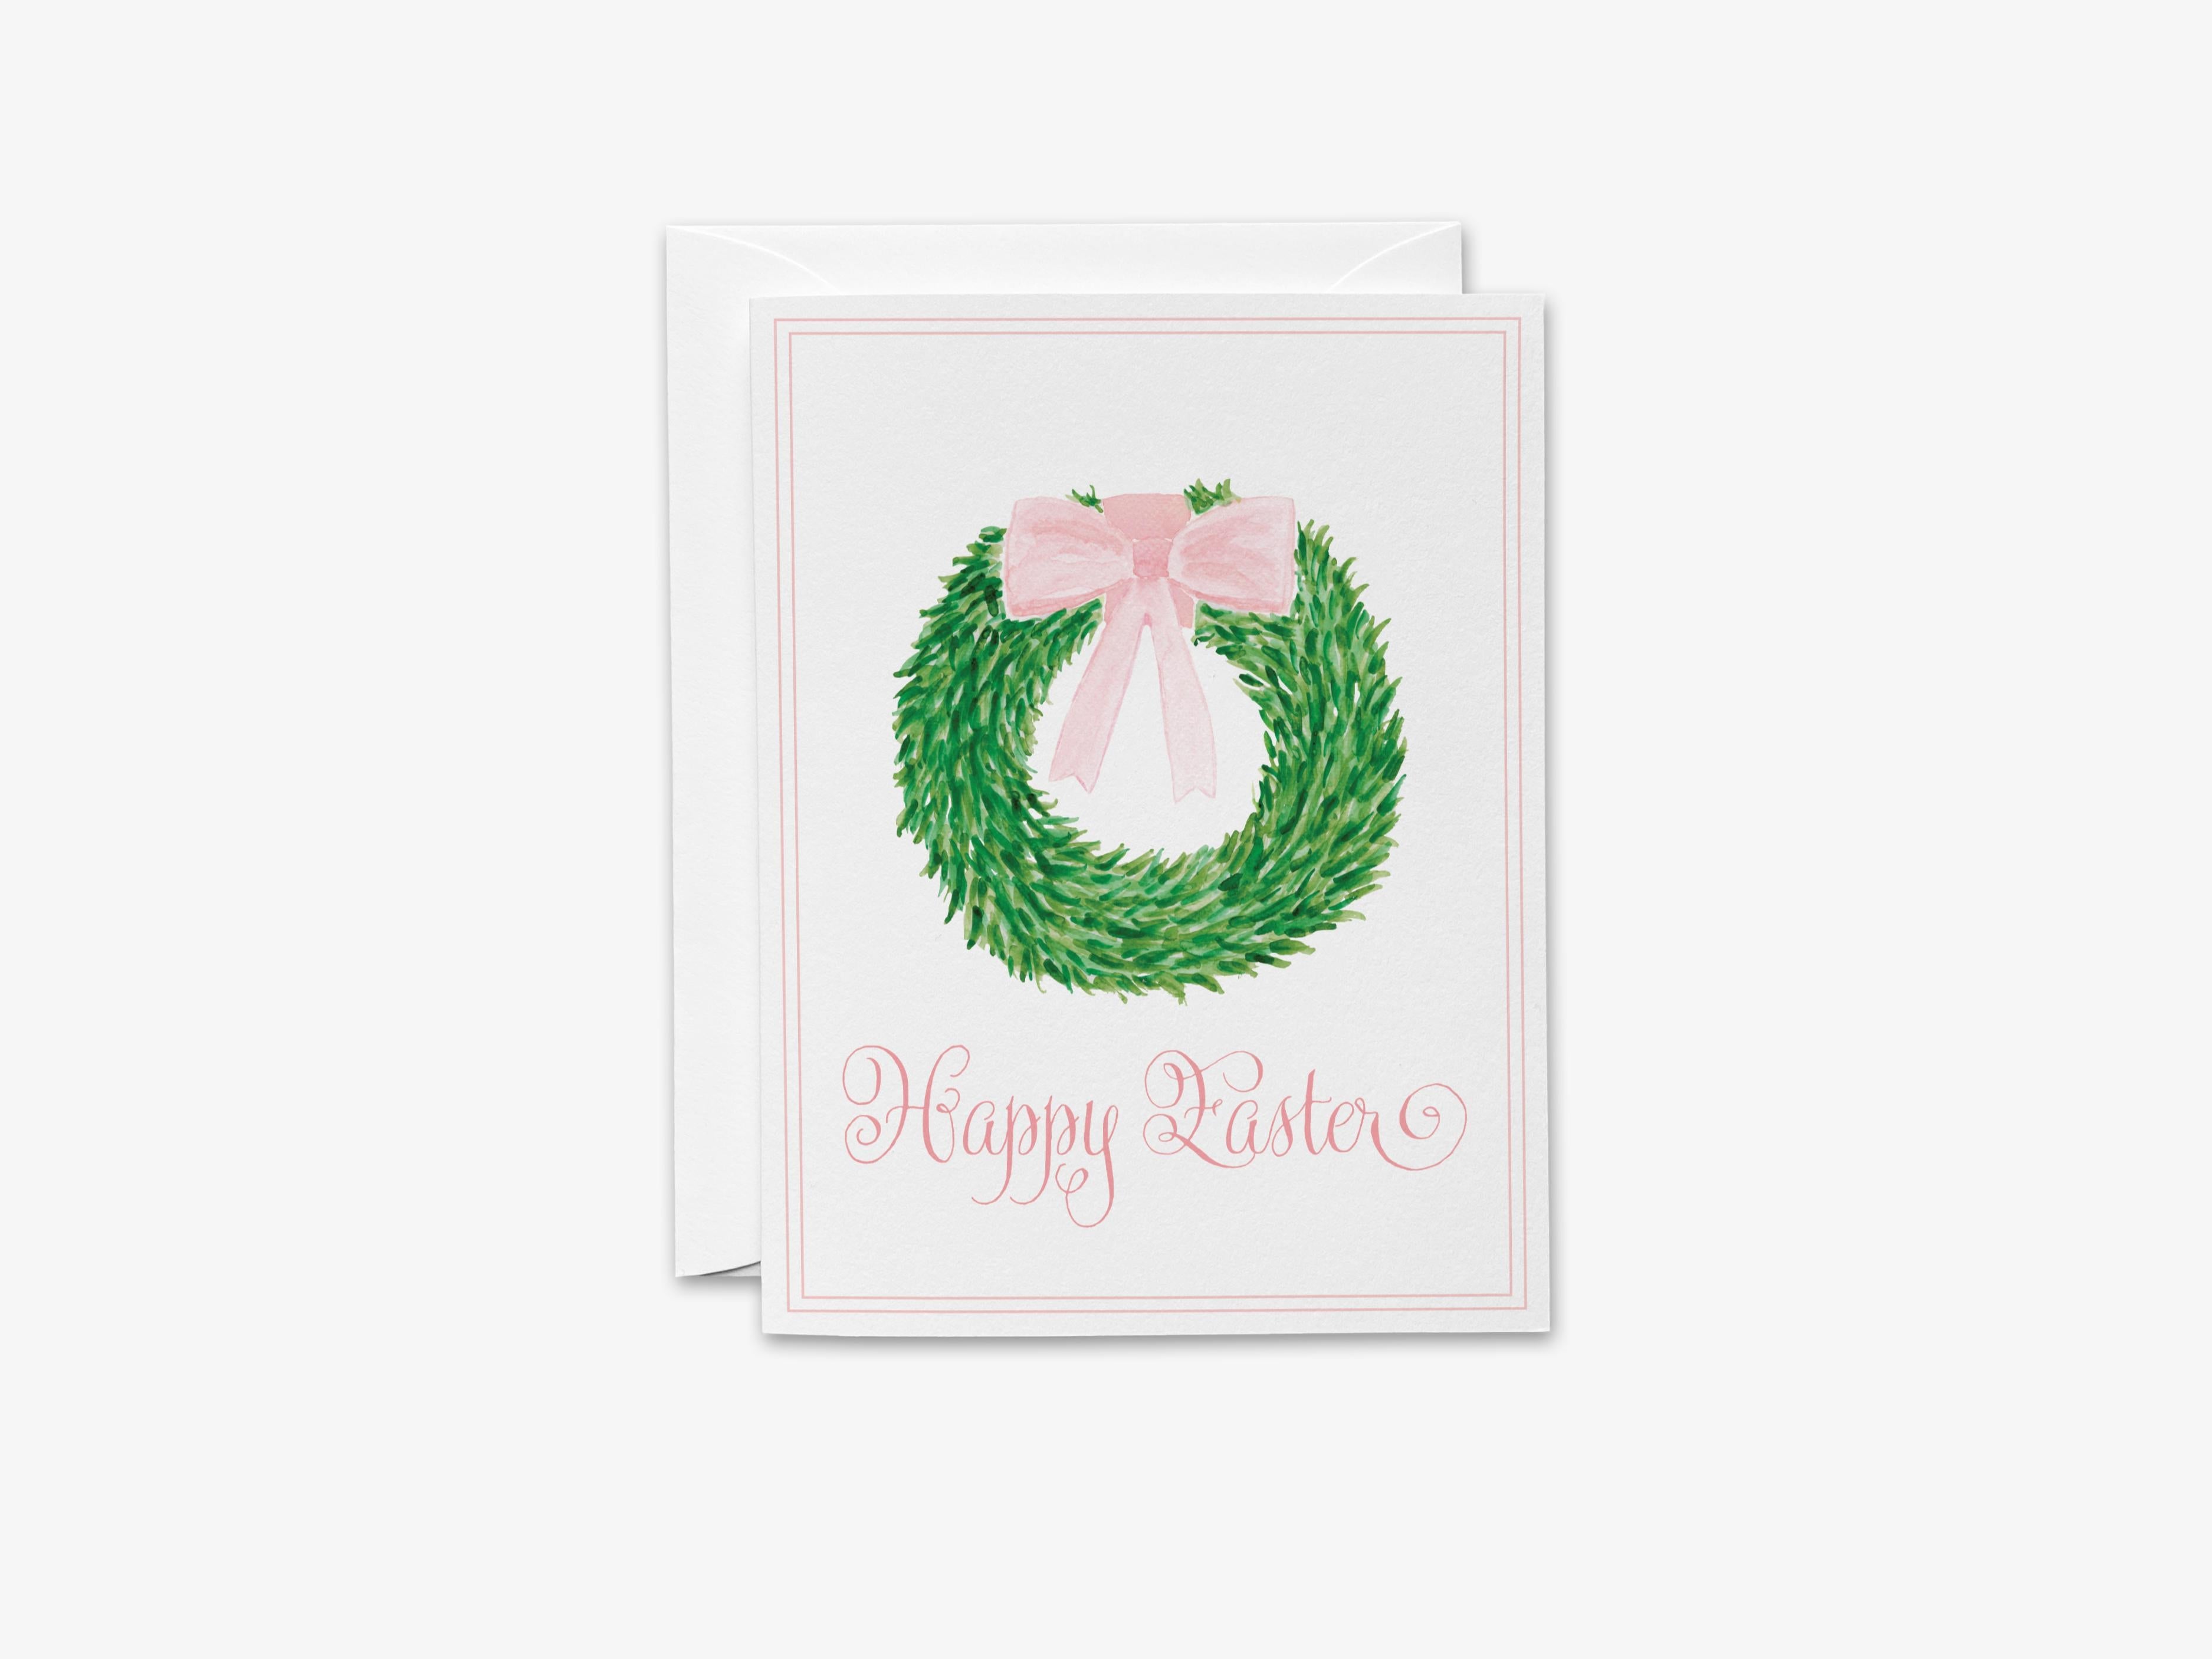 Happy Easter Wreath Greeting Card-These folded spring cards are 4.25x5.5 and feature our hand-painted watercolor wreath with pink bow, printed in the USA on 100lb textured stock. They come with a White envelope and make a thoughtful Easter card for a family member or friend.-The Singing Little Bird